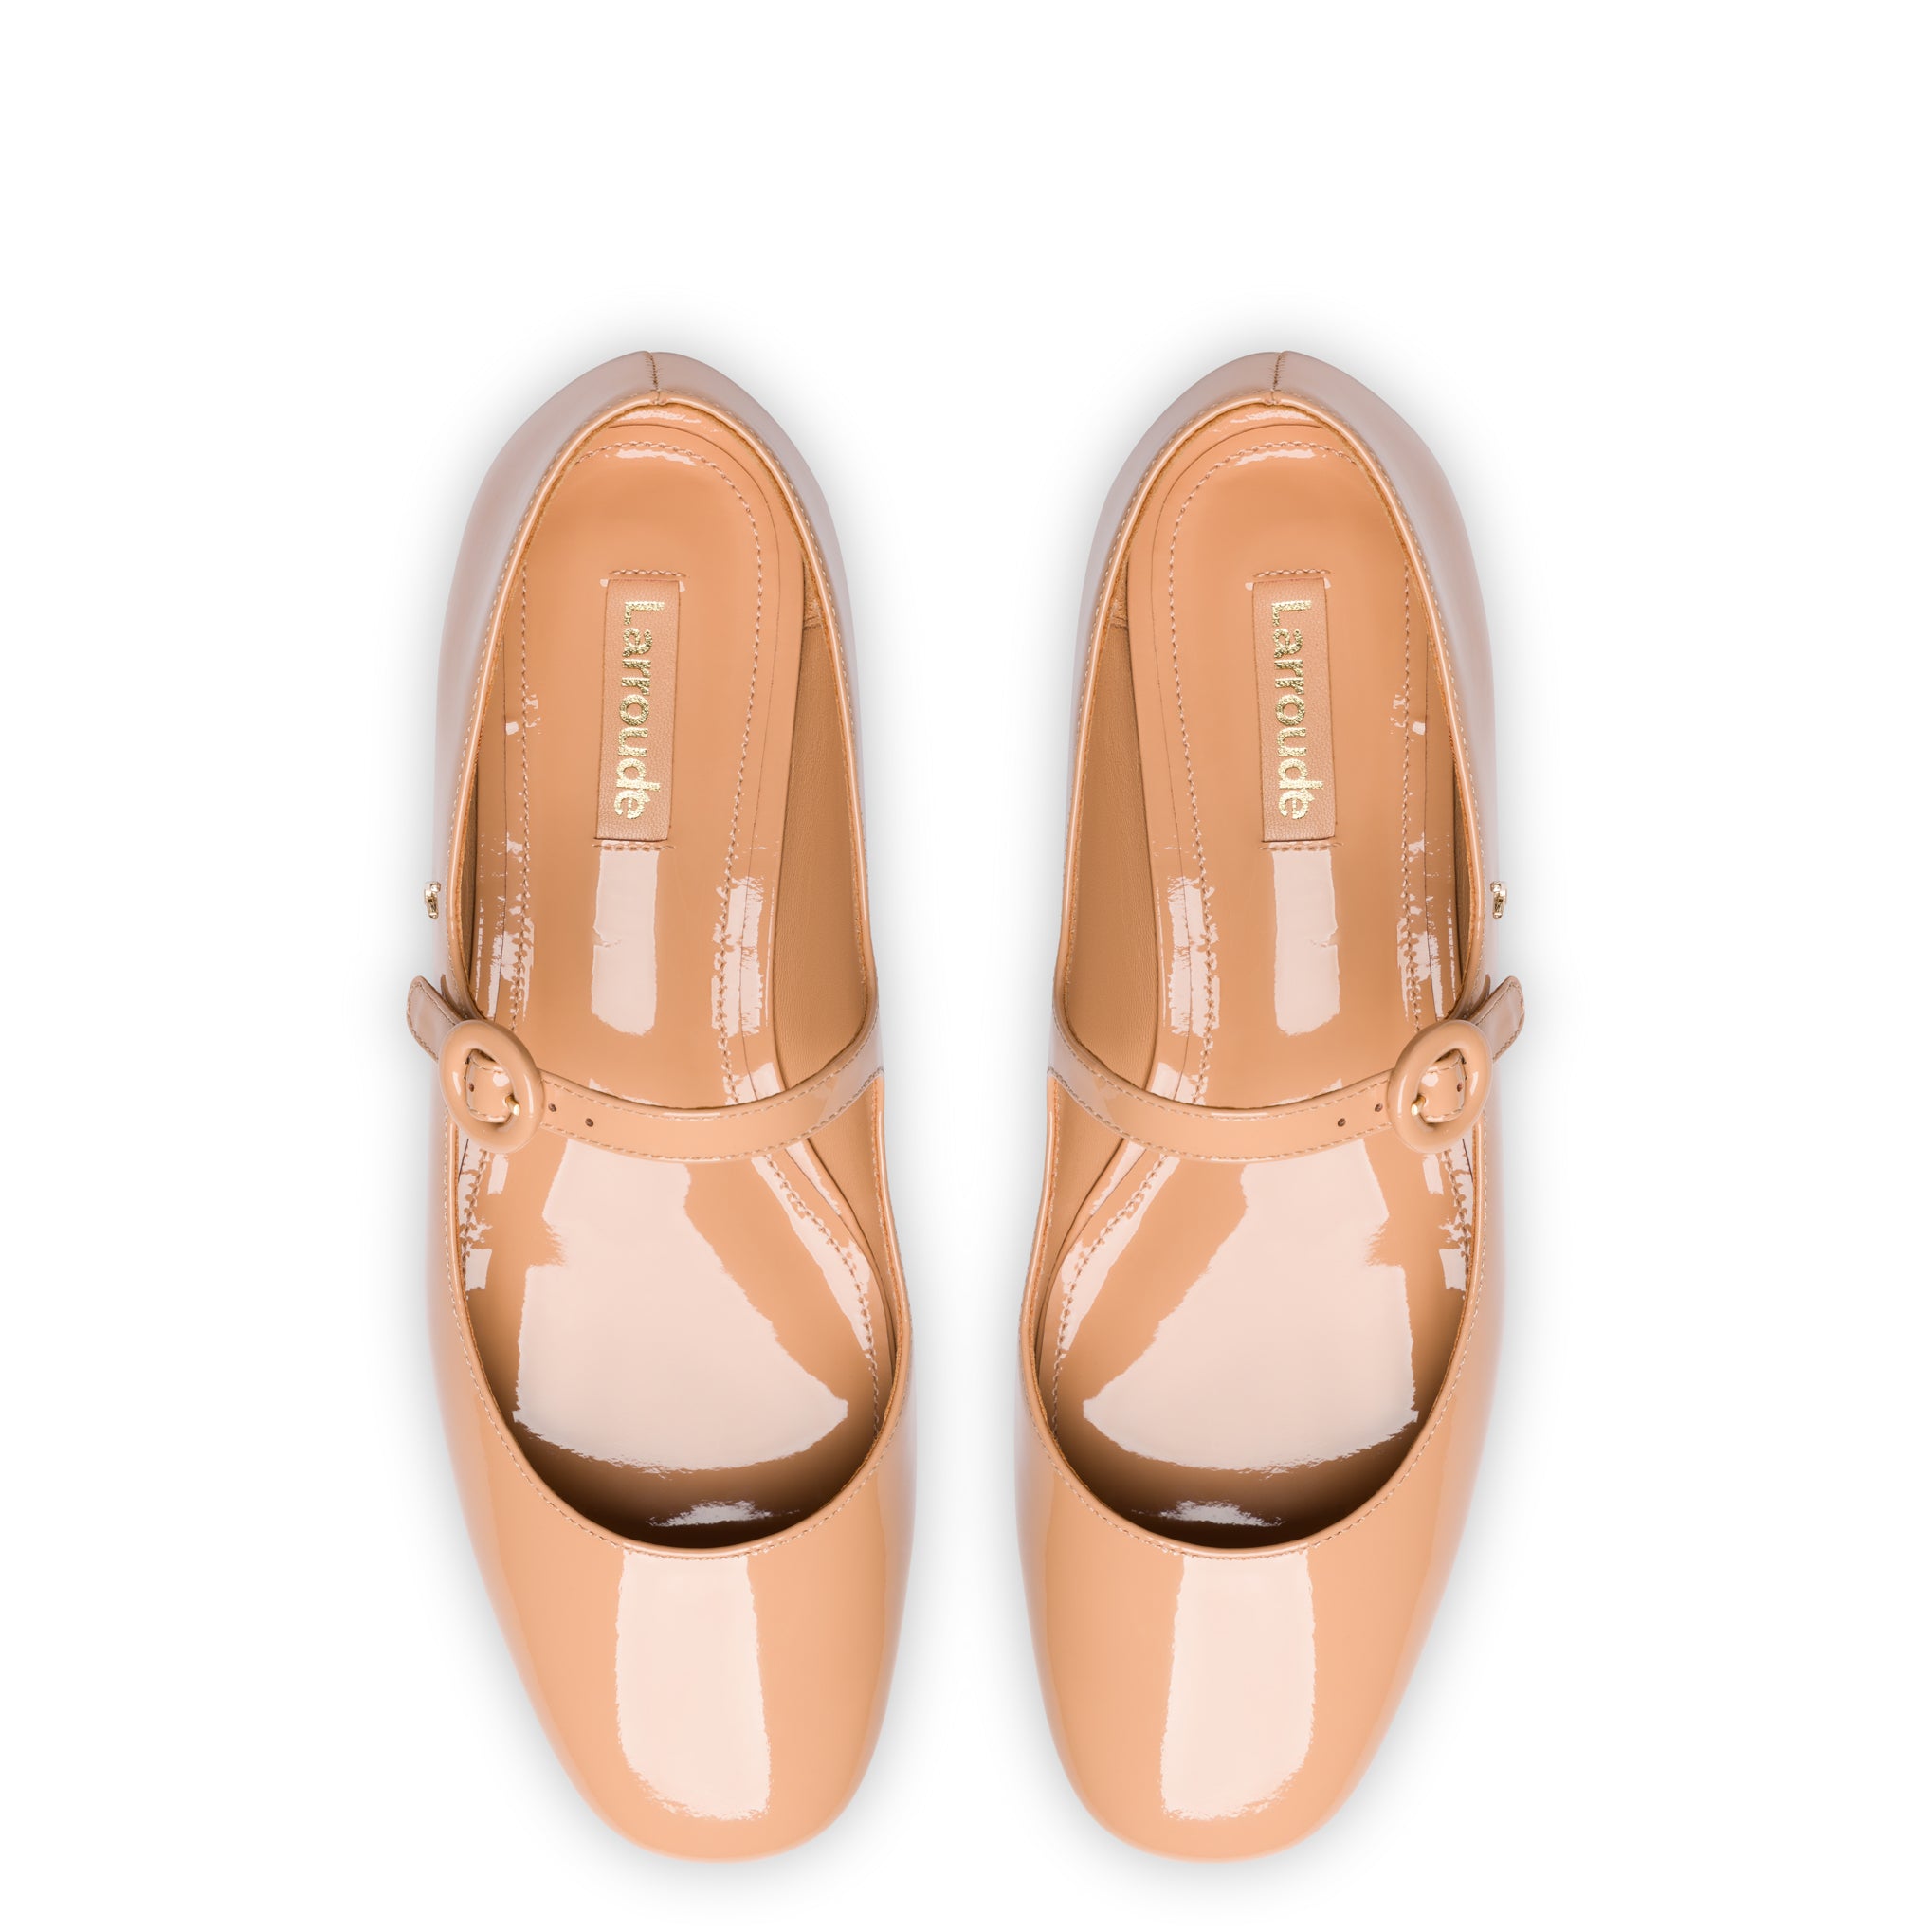 Blair Ballet Flat In Tan Patent Leather